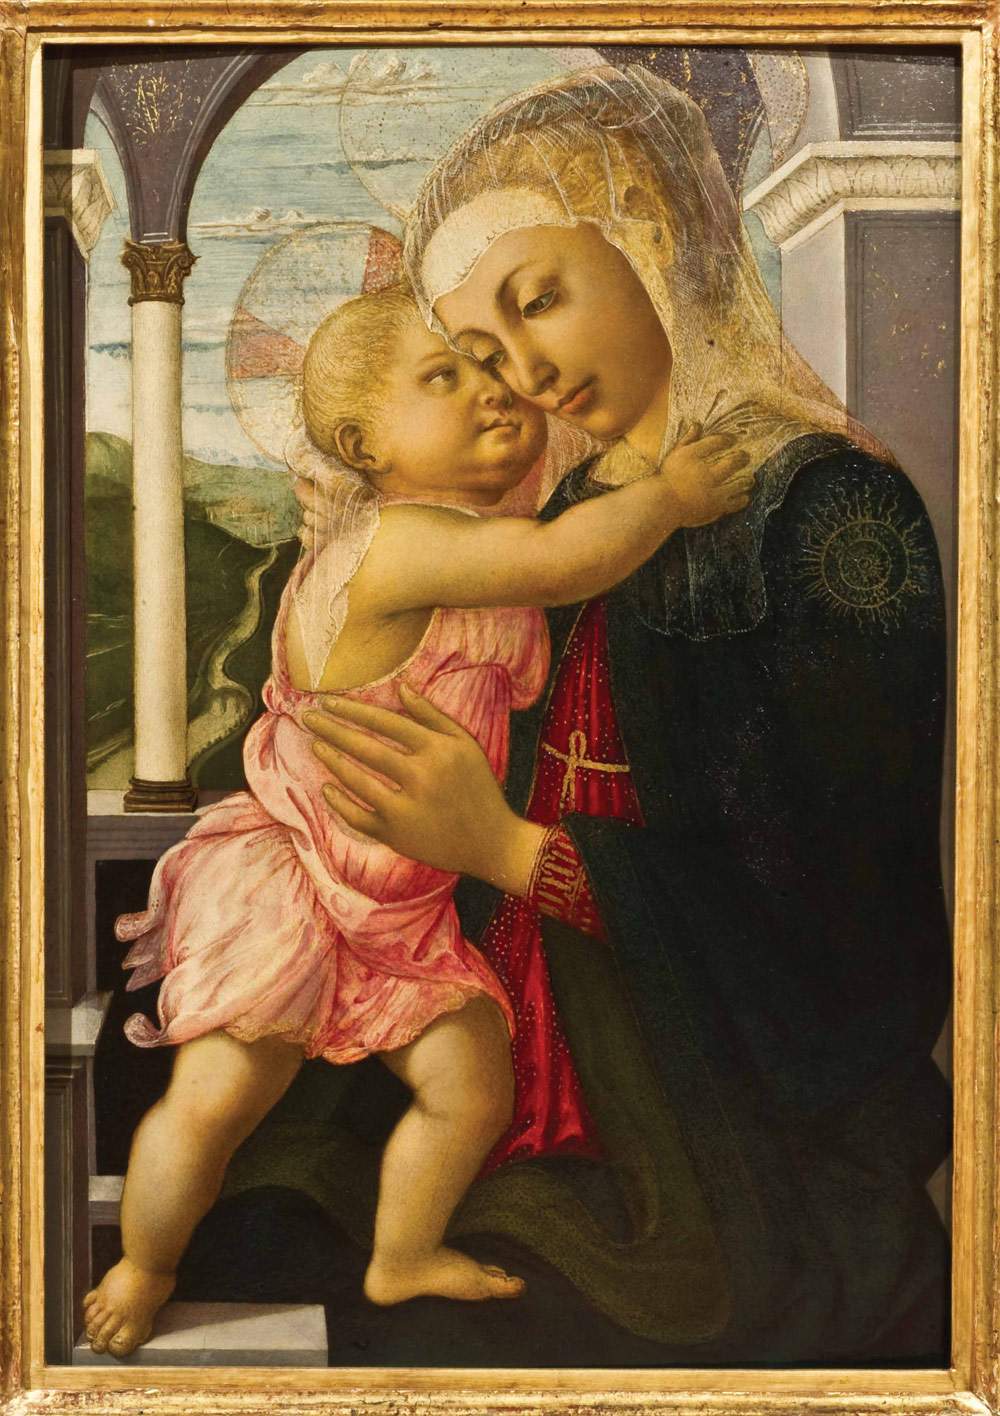 For the first time, Botticelli's Madonna of the Loggia stars at the Hermitage